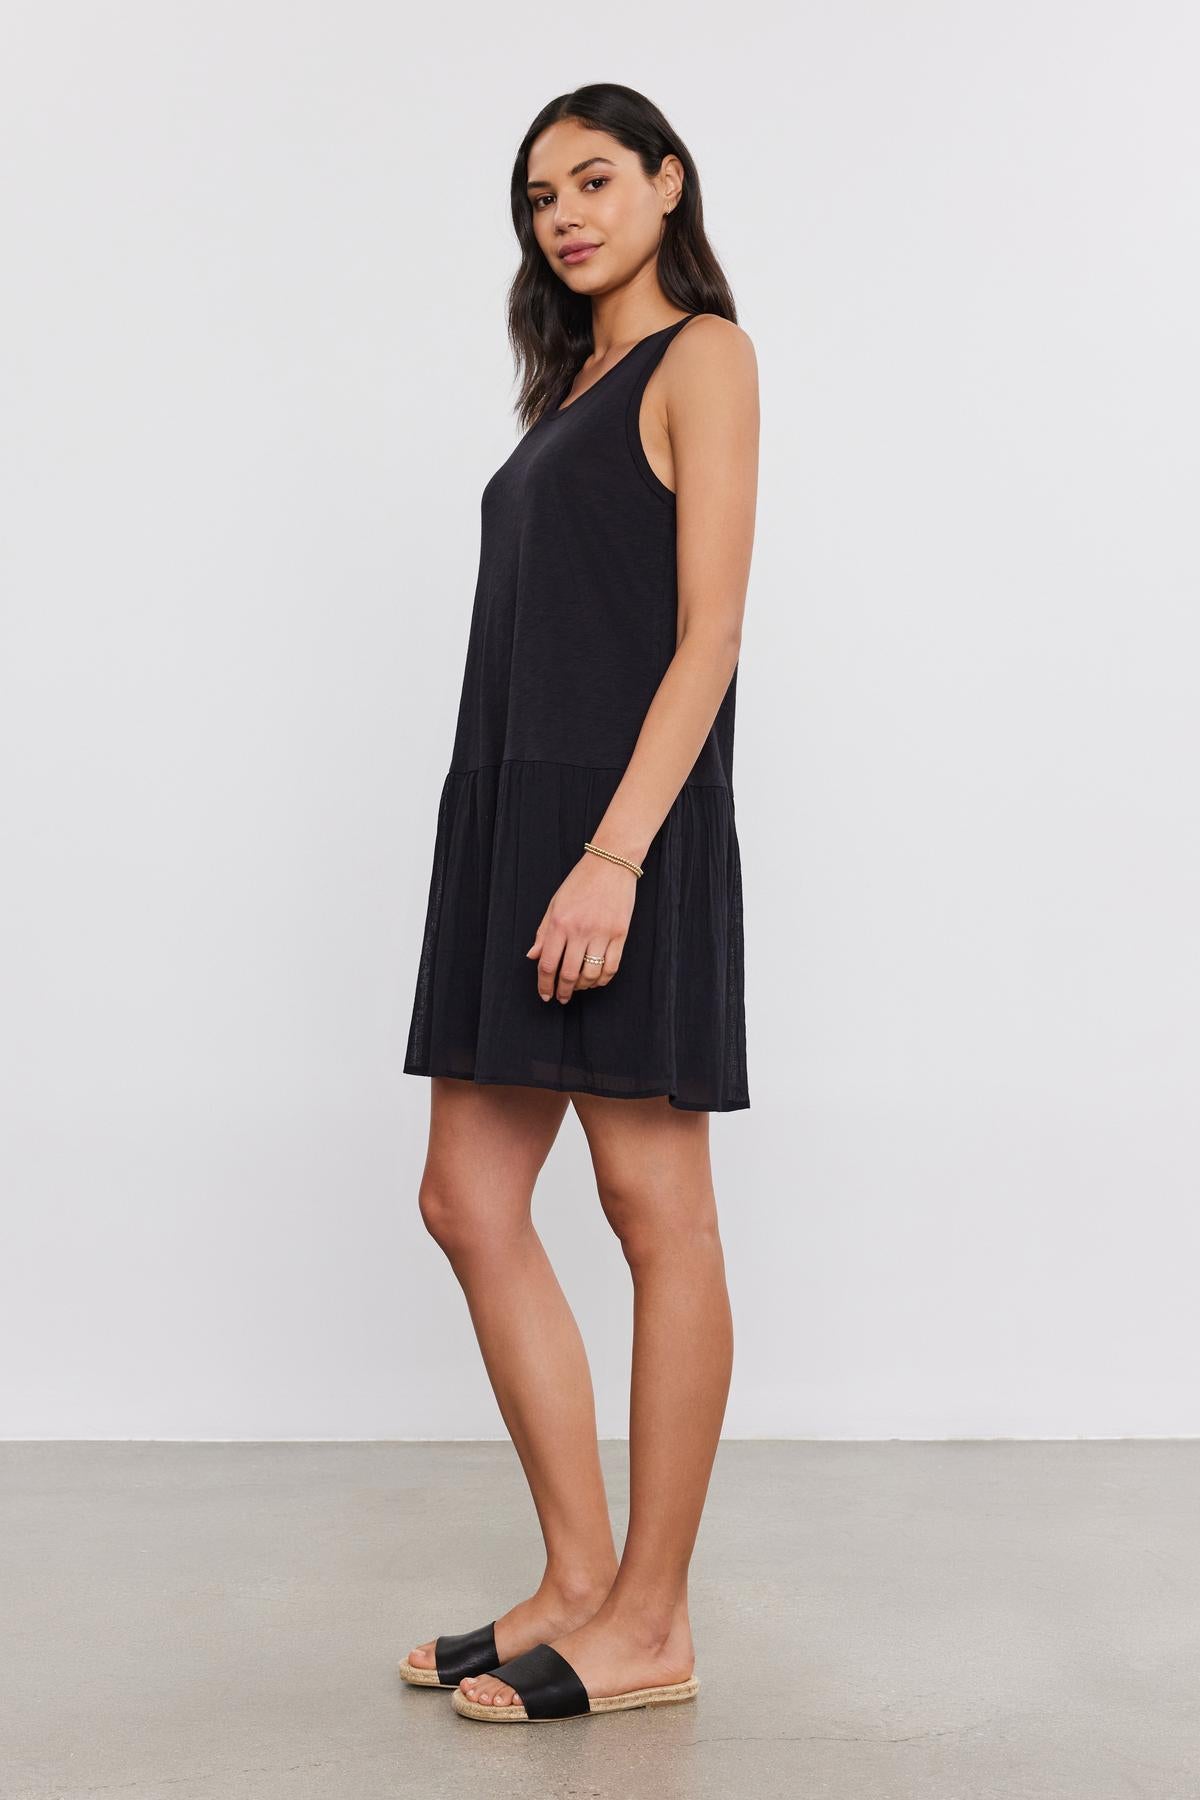 A woman stands against a plain background, wearing a Velvet by Graham & Spencer MINA DRESS and black sandals. She is looking at the camera with her left hand resting by her side.-37054552408257